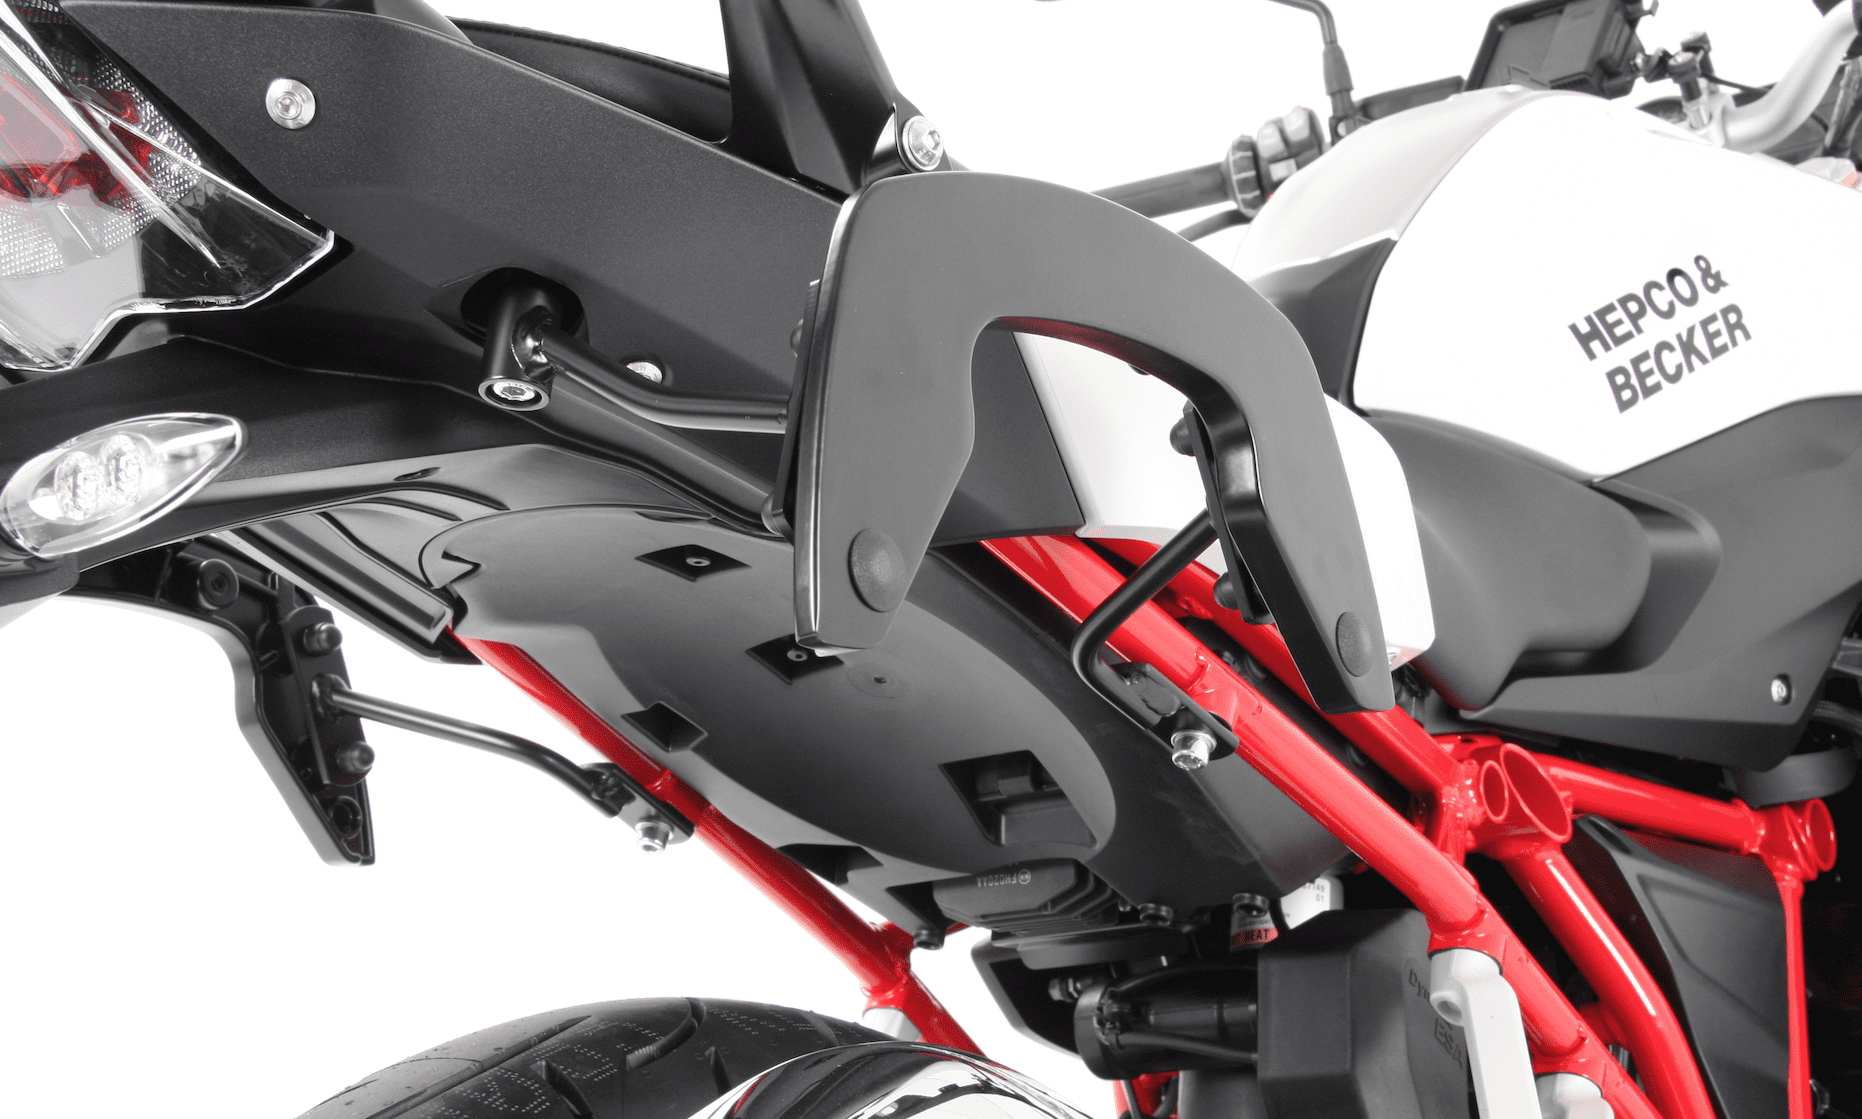 C-Bow sidecarrier for BMW R 1200 R (2015-2018)